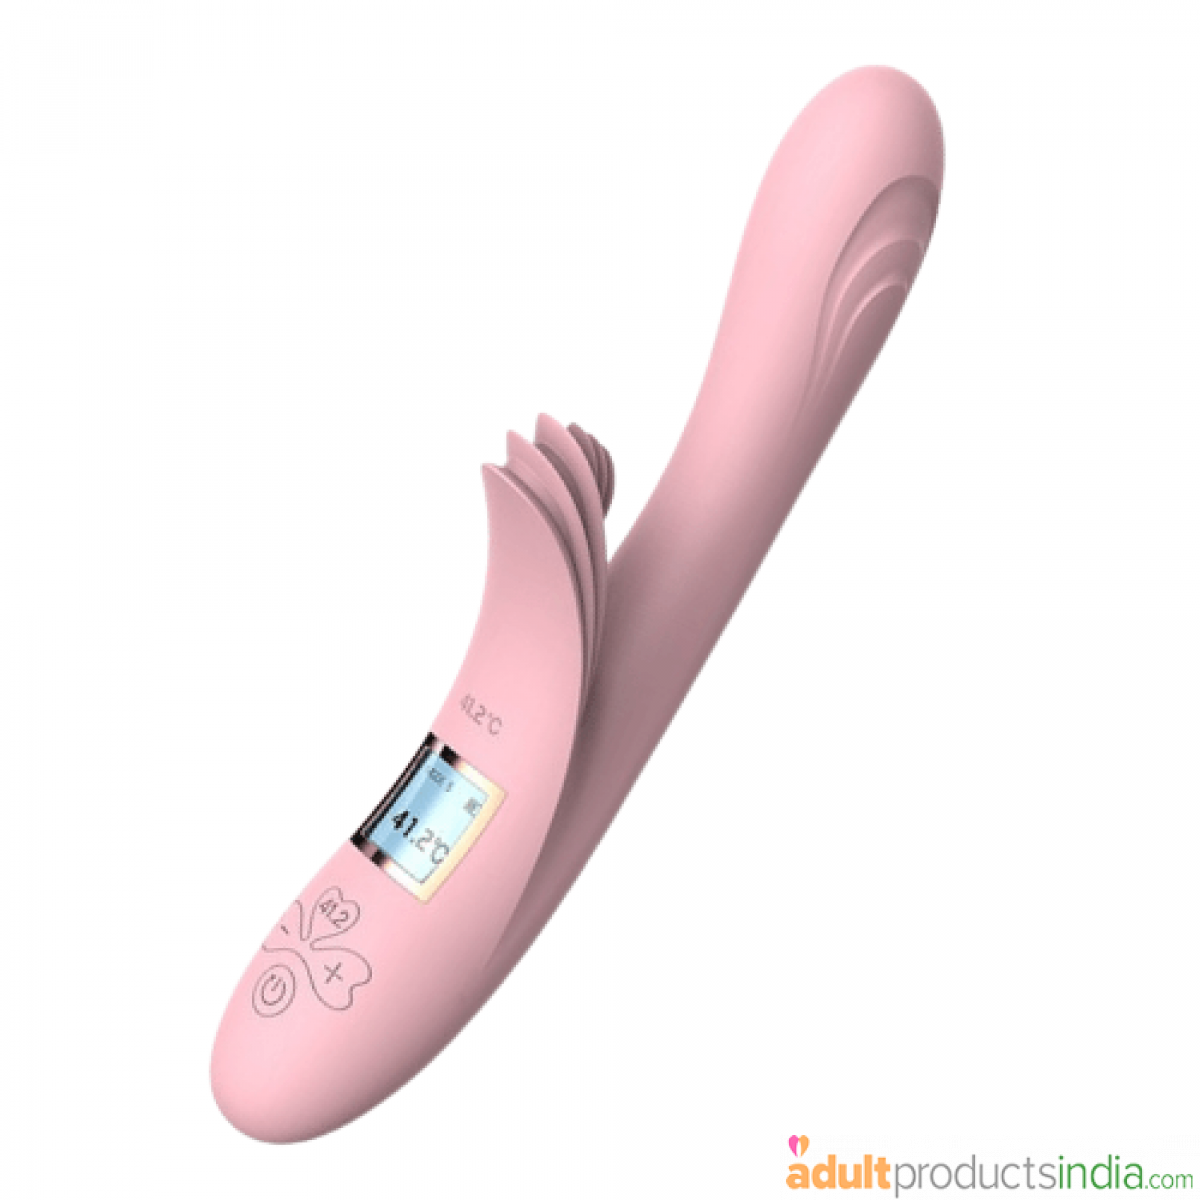 Lilo Heating Rabbit Vibrator For Clitoral and G Spot 